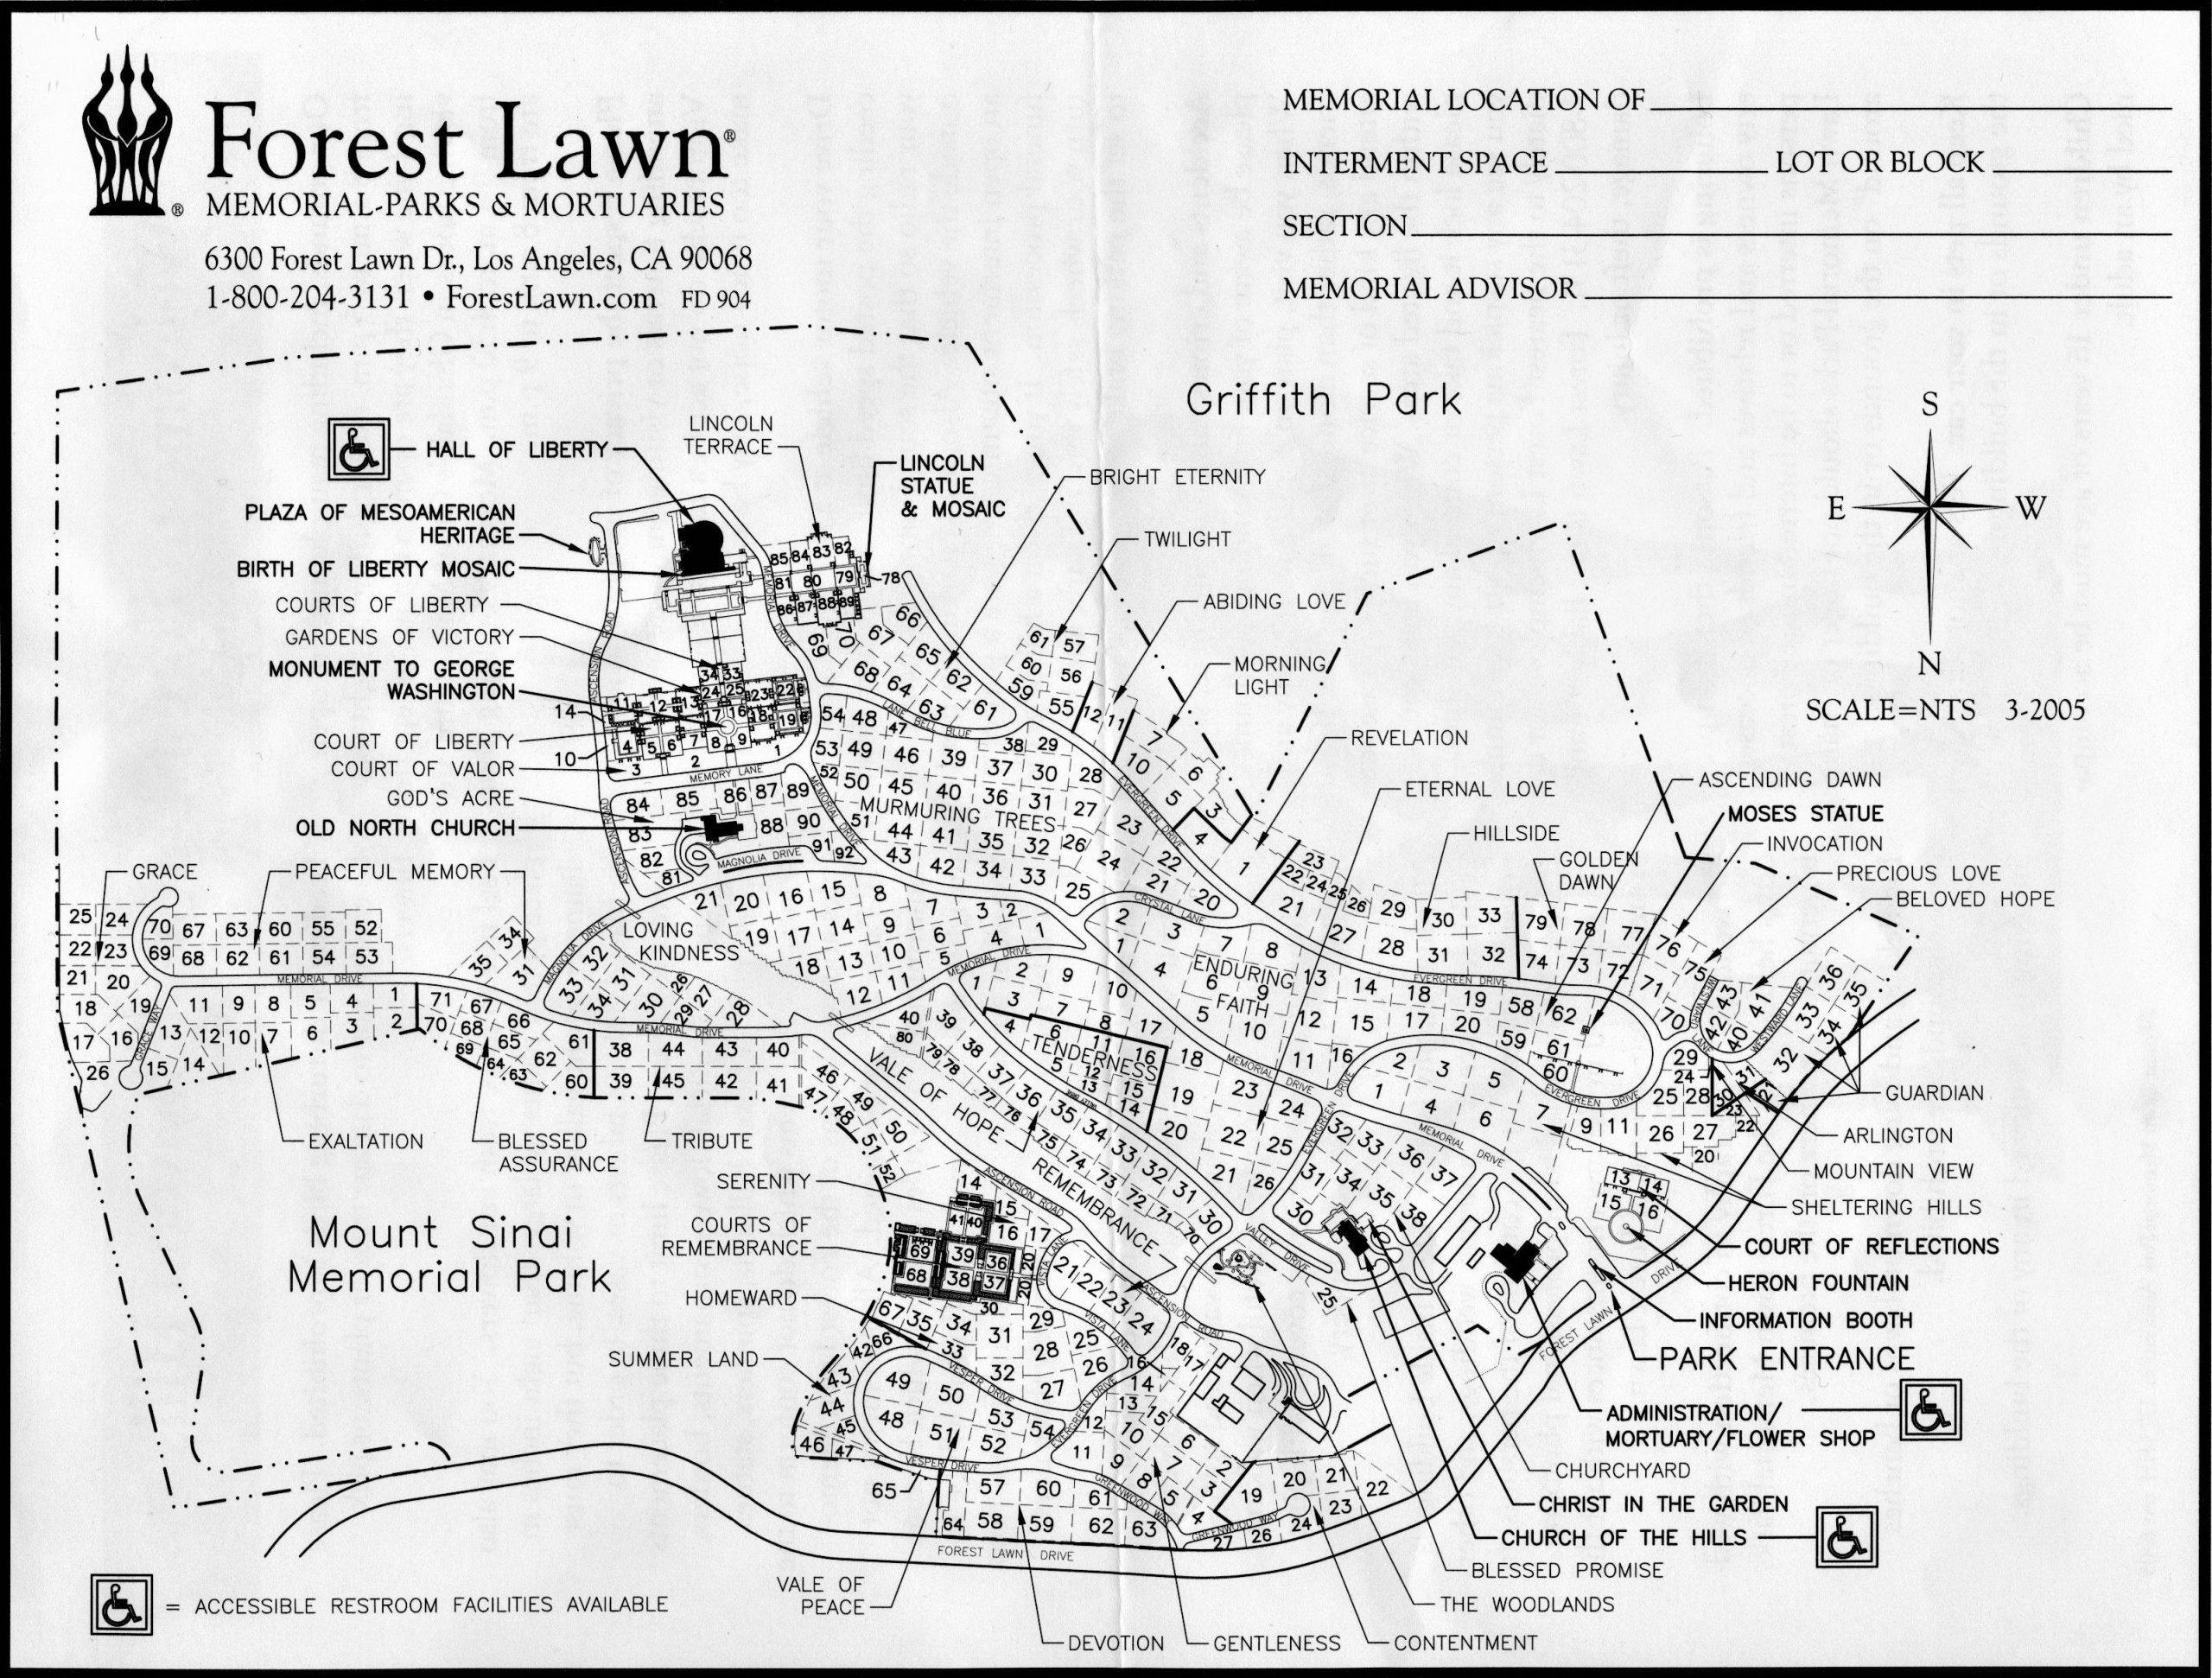 Map of Forest Lawn Memorial Park in Hollywood Hills, Los Angeles, California